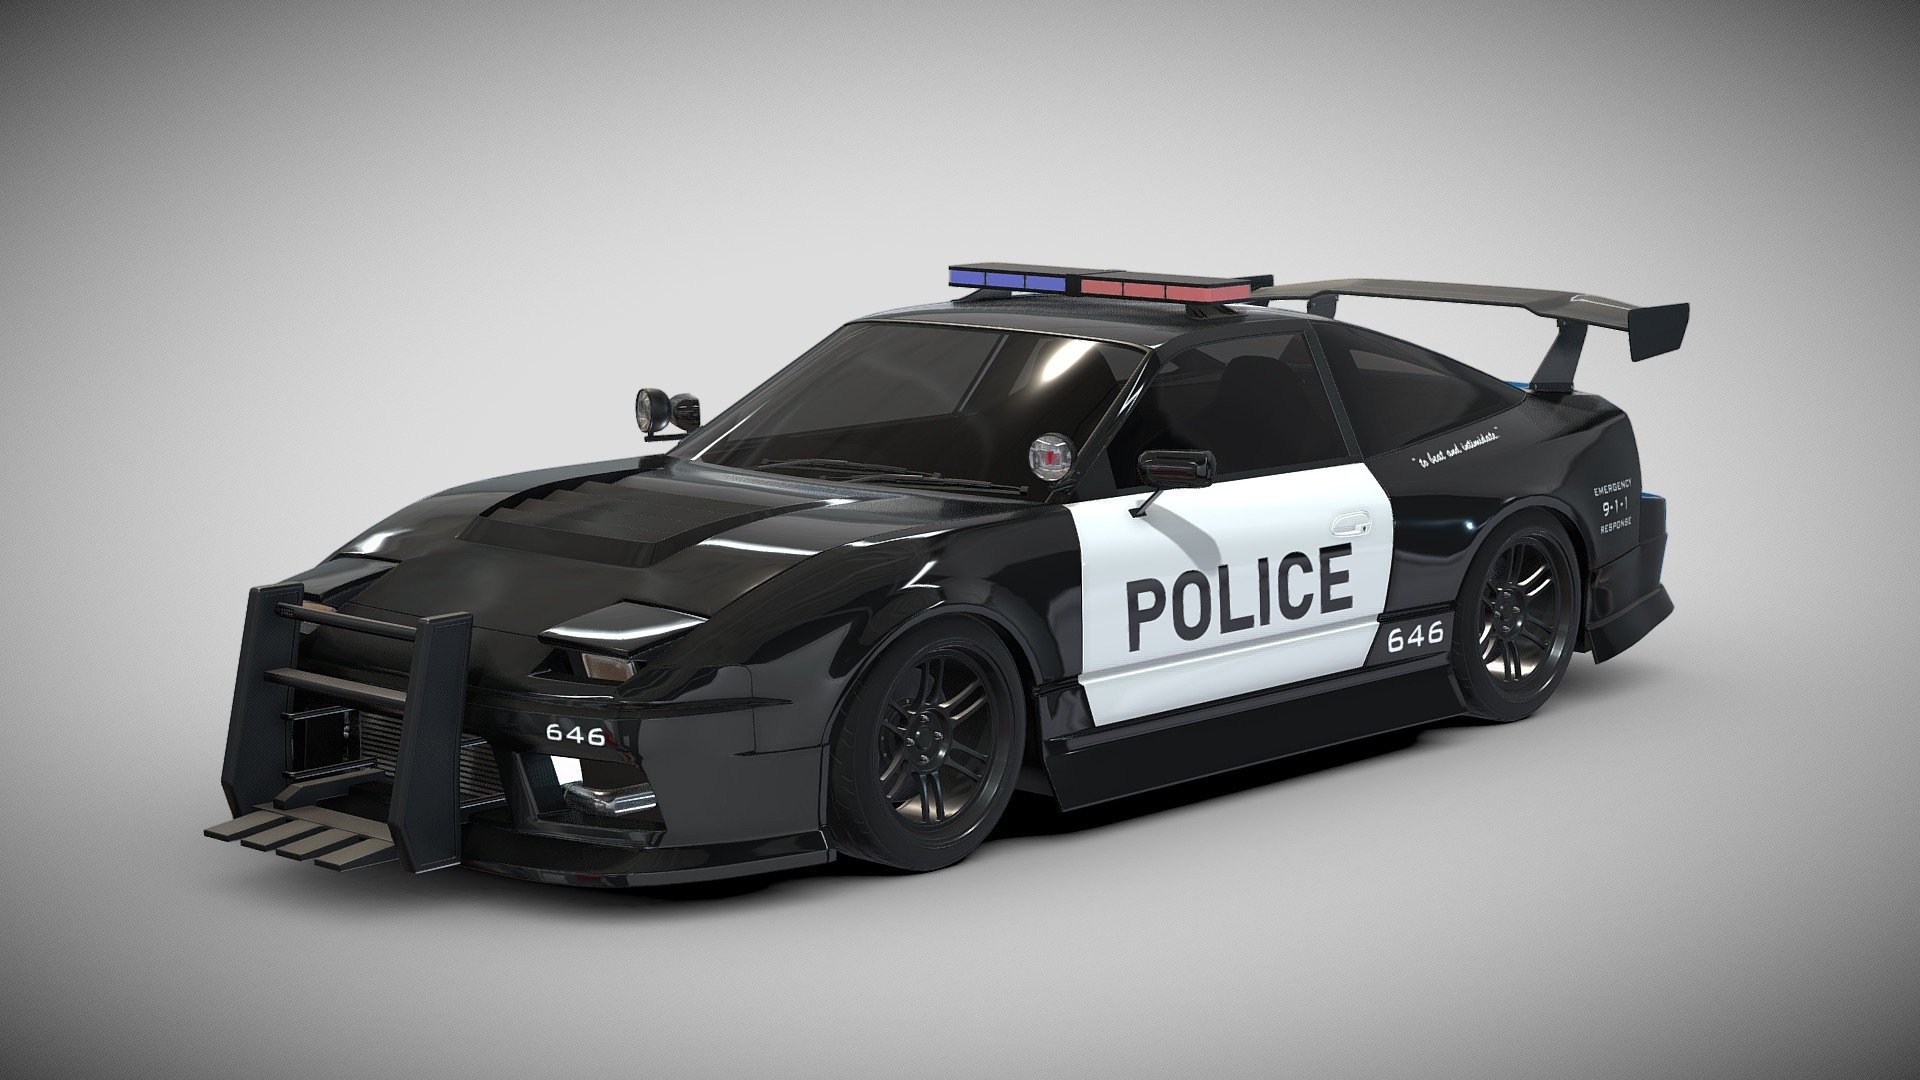 This is 3D model of Nissan 180SX with police attribute that i has made in Blender

I made this inspired by the Nissan Silvia S13 car which was given police attributes belonging to a drifter from Japan which was used in the Doridore 2019 drifting event in Japan.

And also I was inspired by the Ford Mustang police car in the Transformers movie called Barricade.

So from that I tried to make something unique by combining cars that are usually used for drifting, then the car was given police attributes like those in the real world.

Pop-up lamp available

 - Nissan 180SX Police Car - Buy Royalty Free 3D model by Naudaff3D 3d model